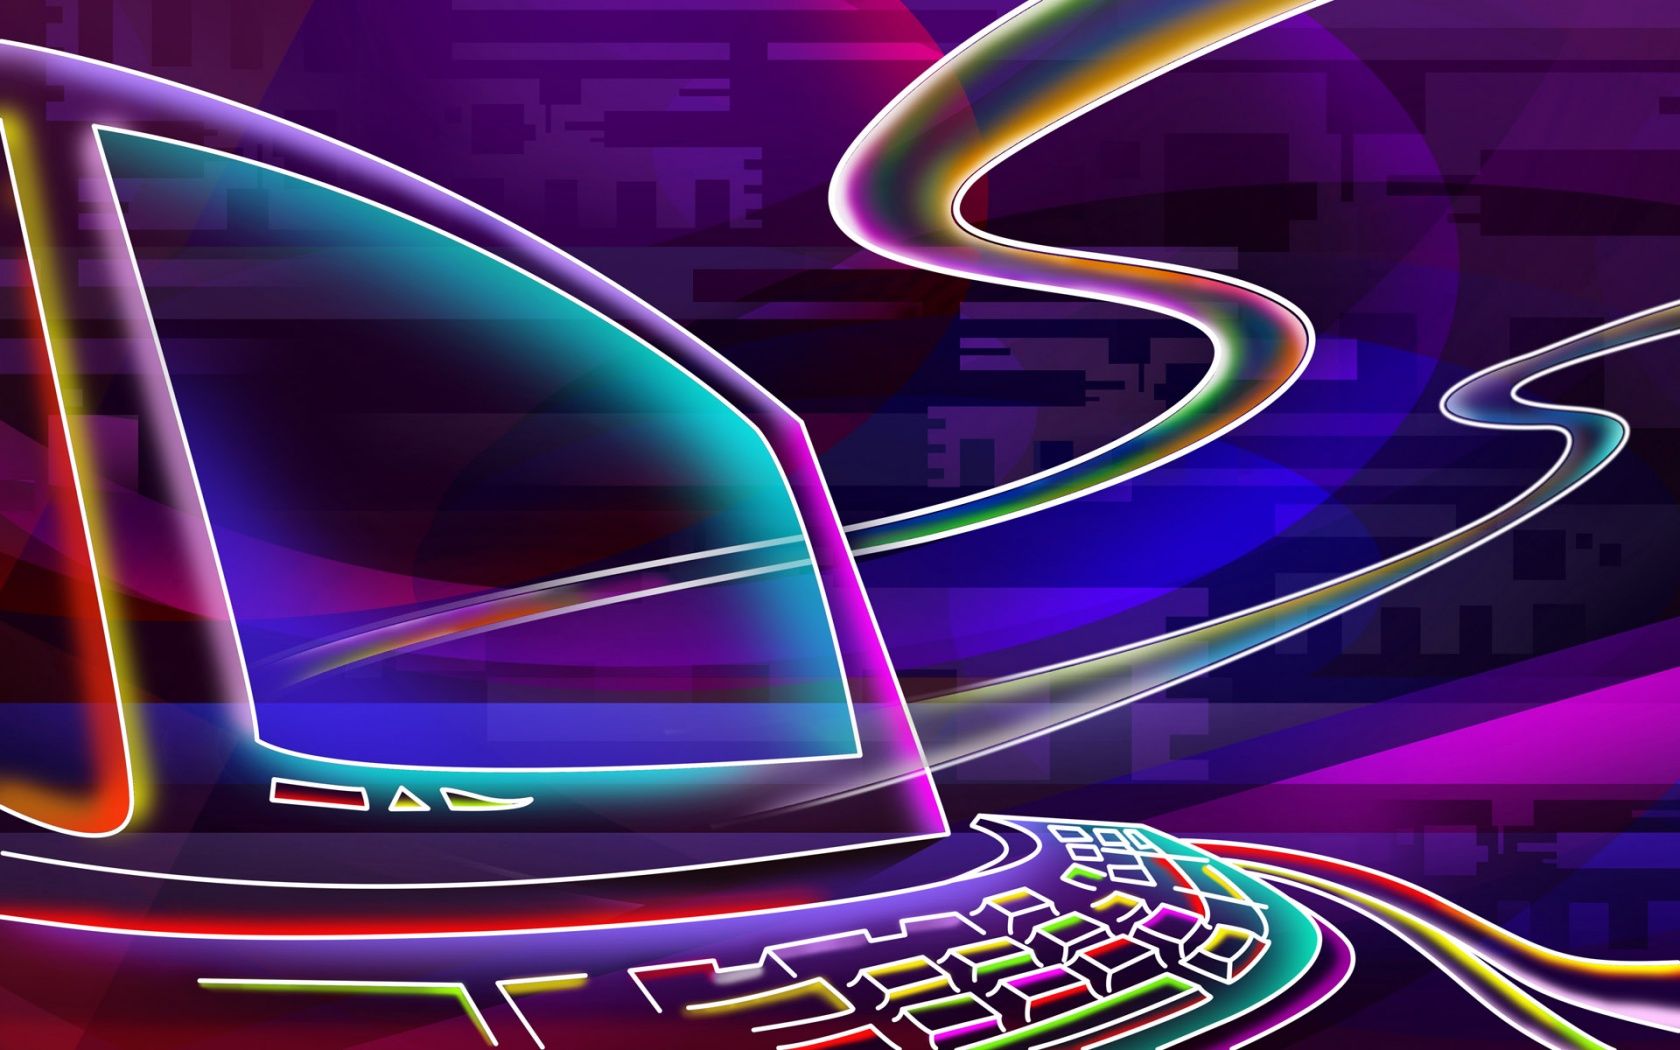 Funky Pc Desktop Wallpaper 3d Abstract Pictures